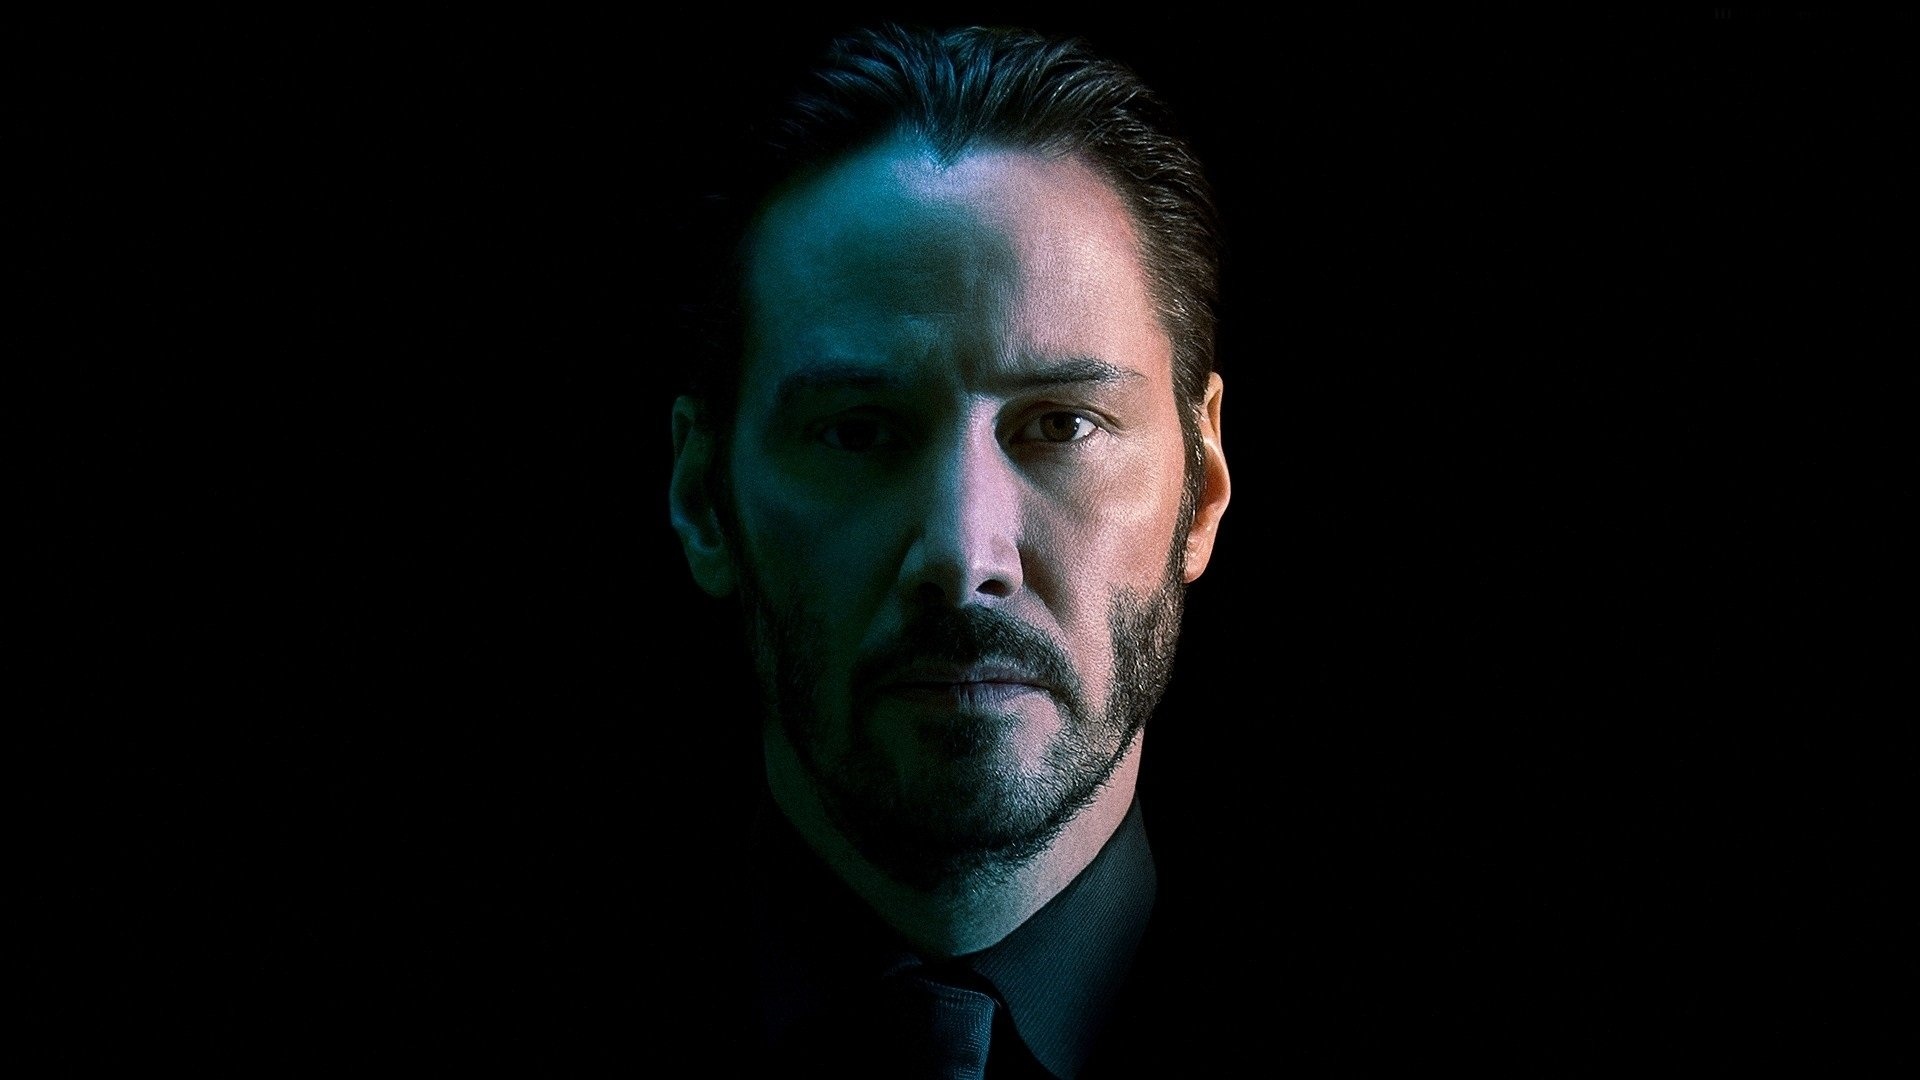 John Wick HD wallpapers, High-quality images, Stunning backgrounds, Movie-themed, 1920x1080 Full HD Desktop